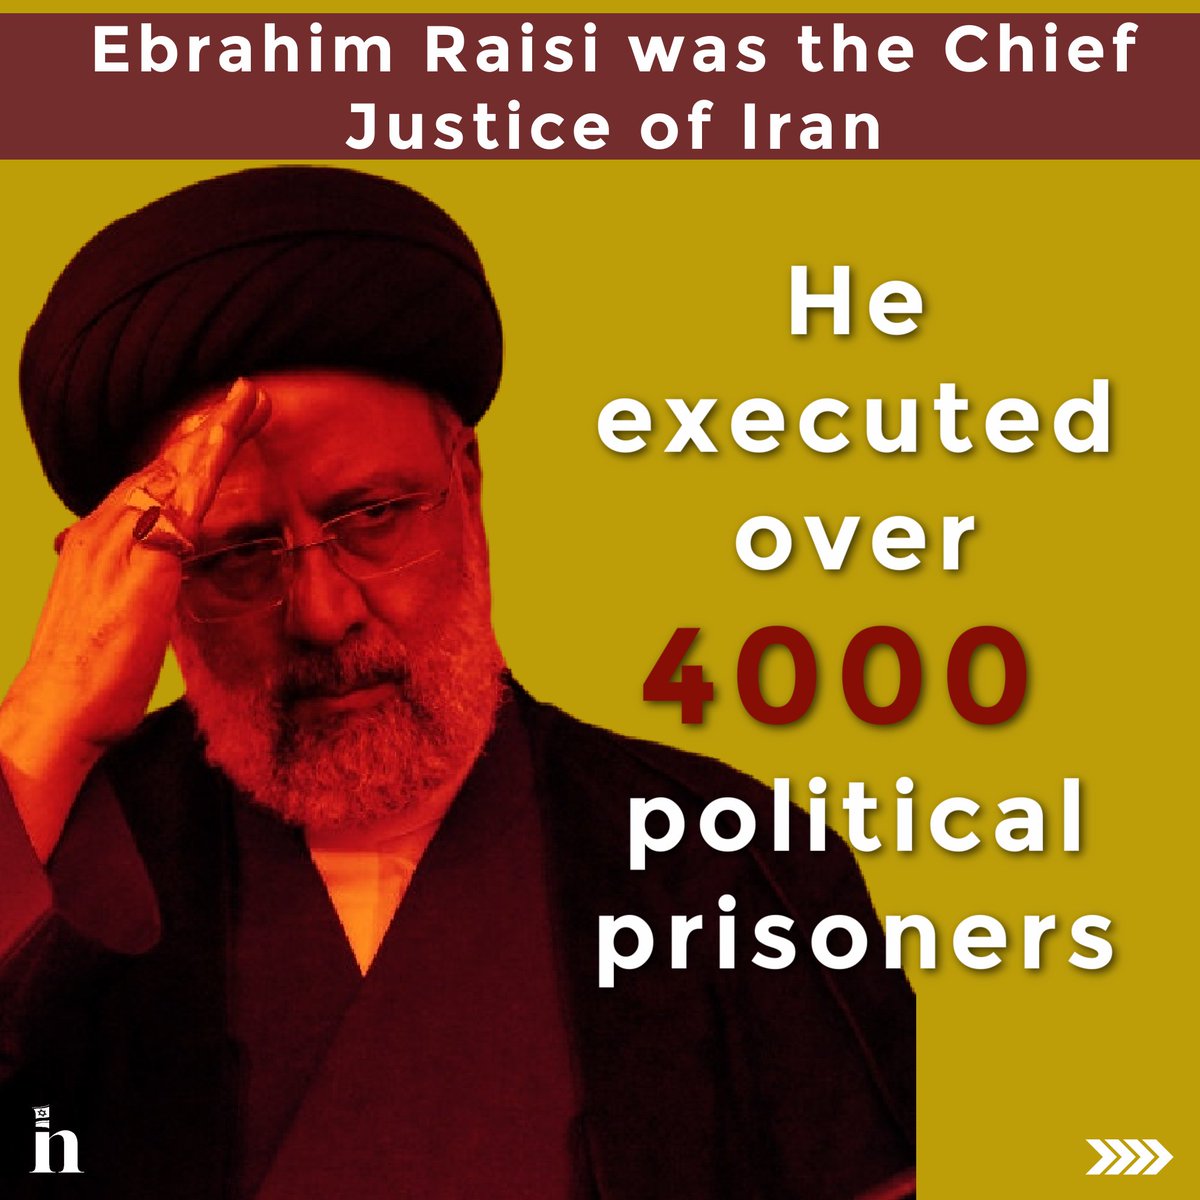 The President of Iran, Ebrahim Raisi is missing after being in a helicopter crash. His nickname is 'The Butcher'. When he was the Chief of Justice in Iran, he ordered the execution of over 4000 Iranian political prisoners. He has blood on his hands. #Iran